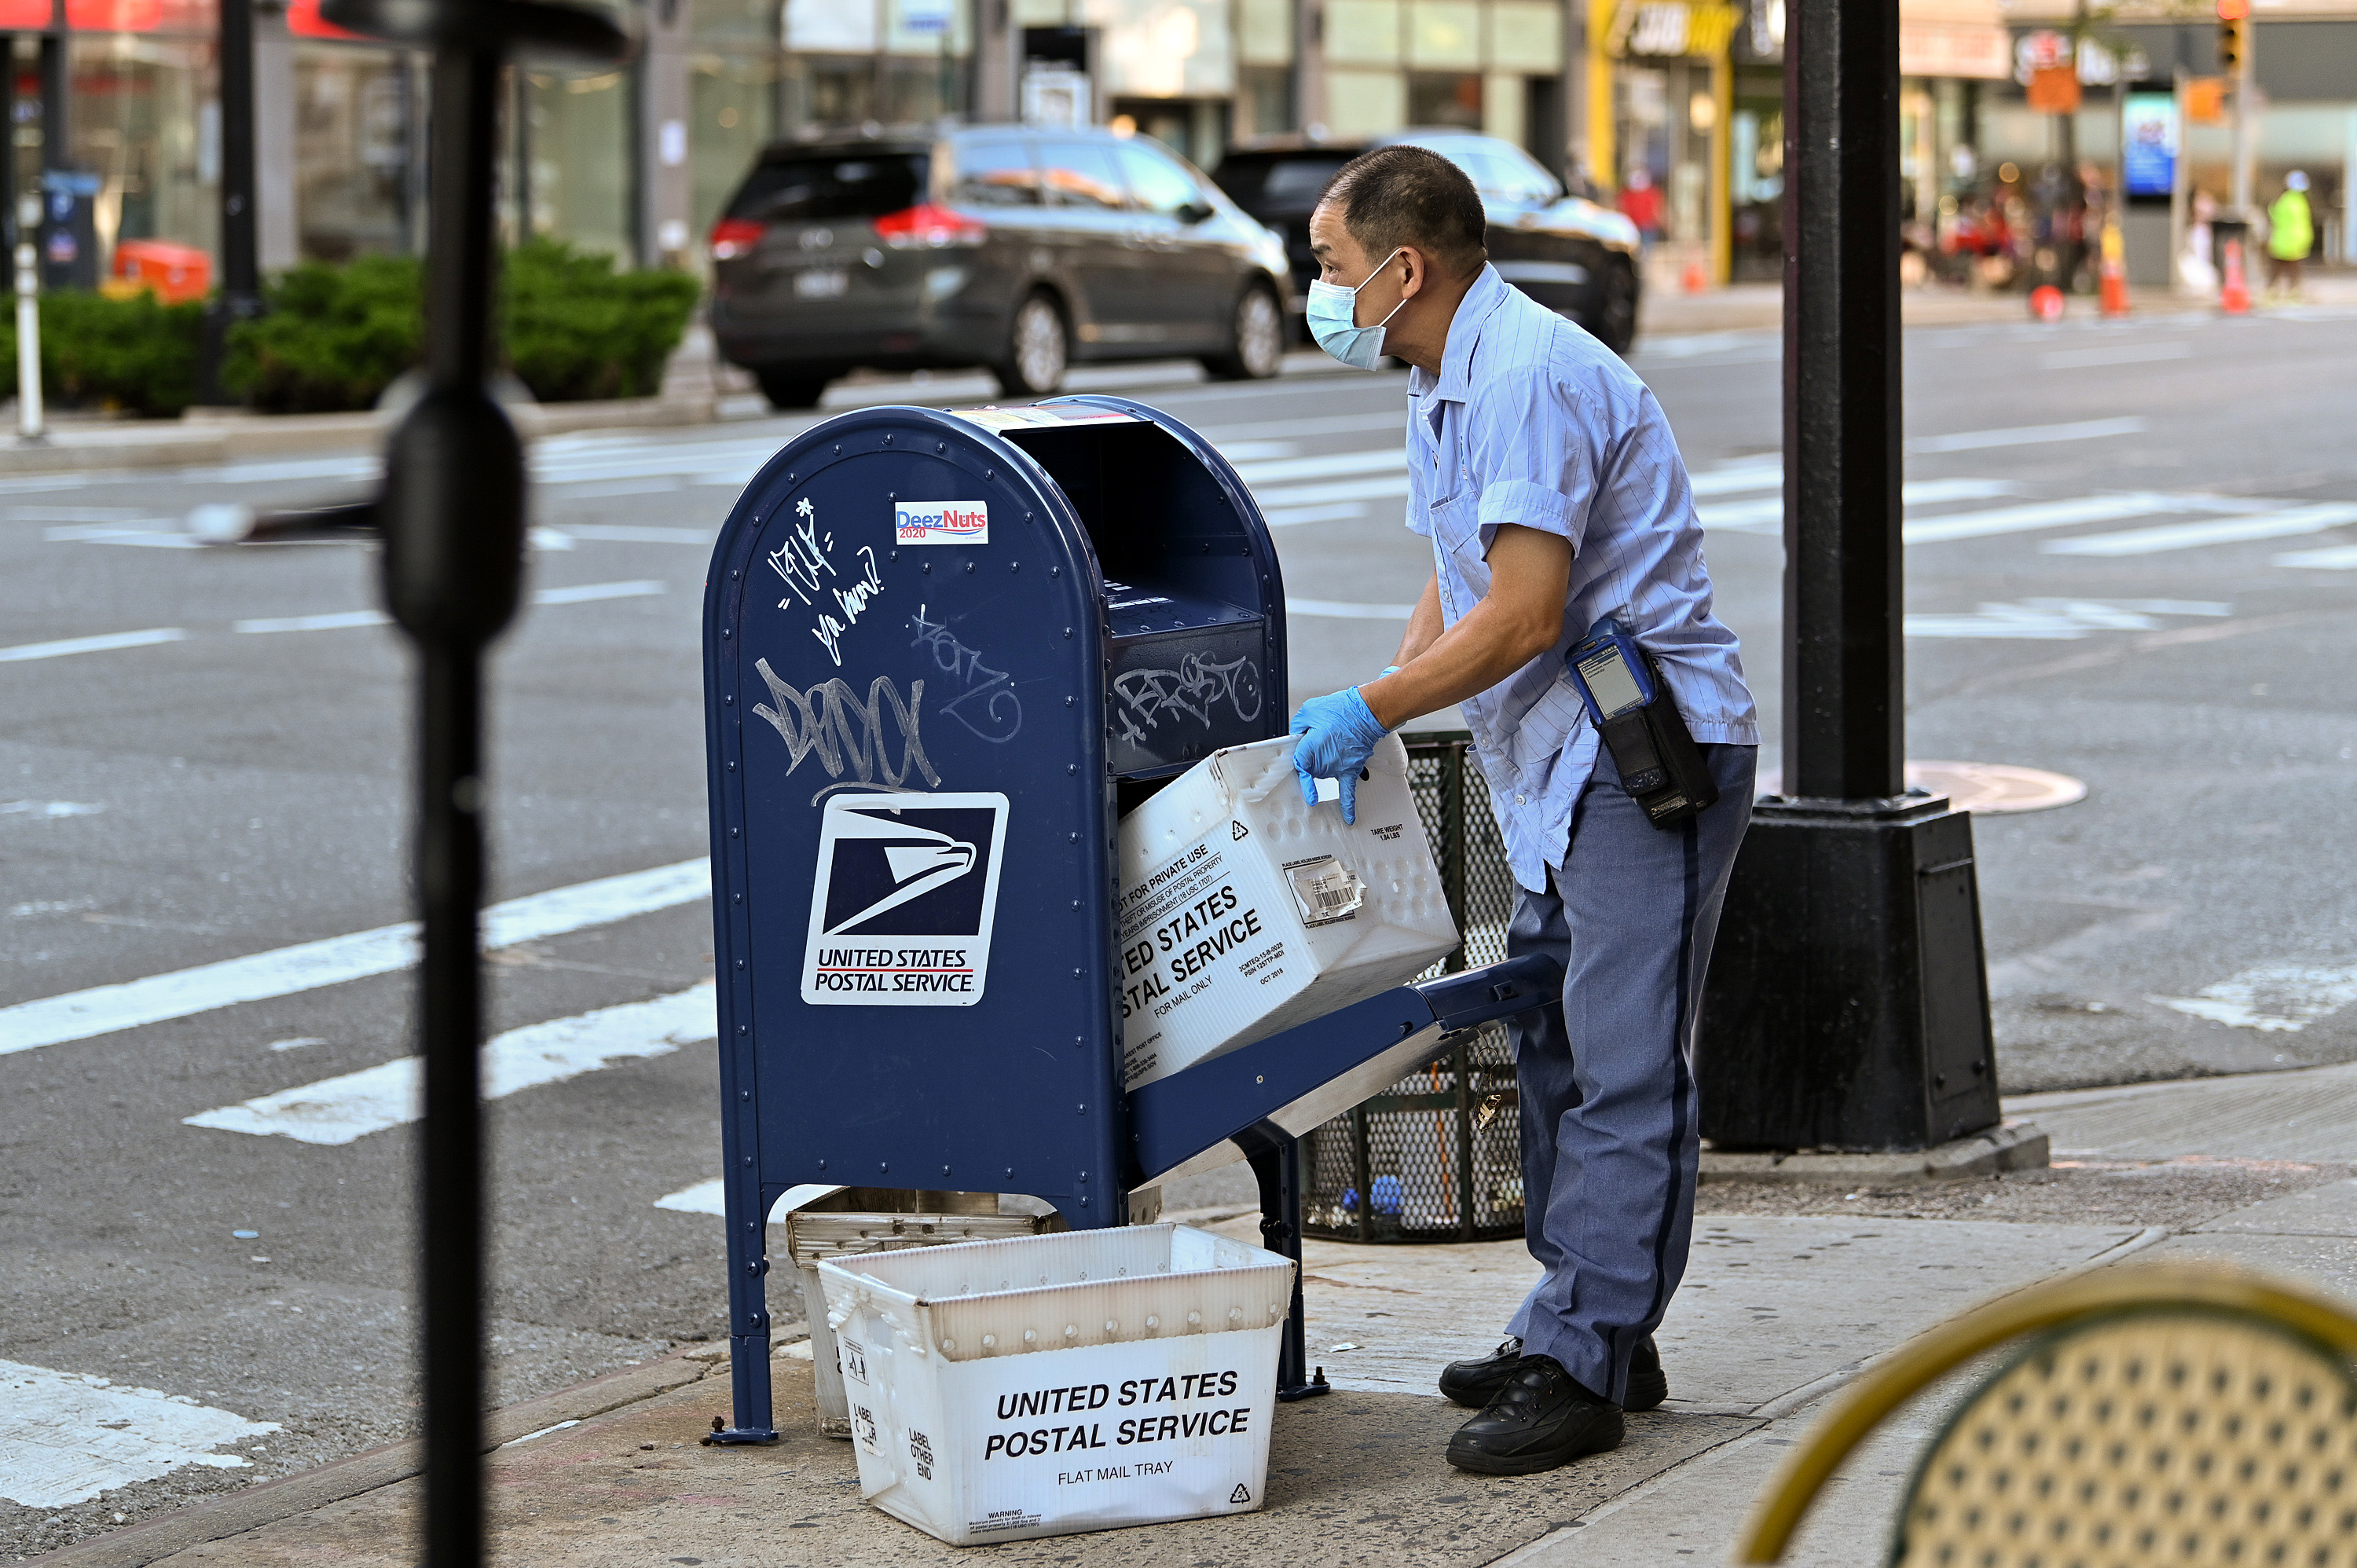 Is There Mail on MLK Day 2022? Post Office Hours on Martin Luther King